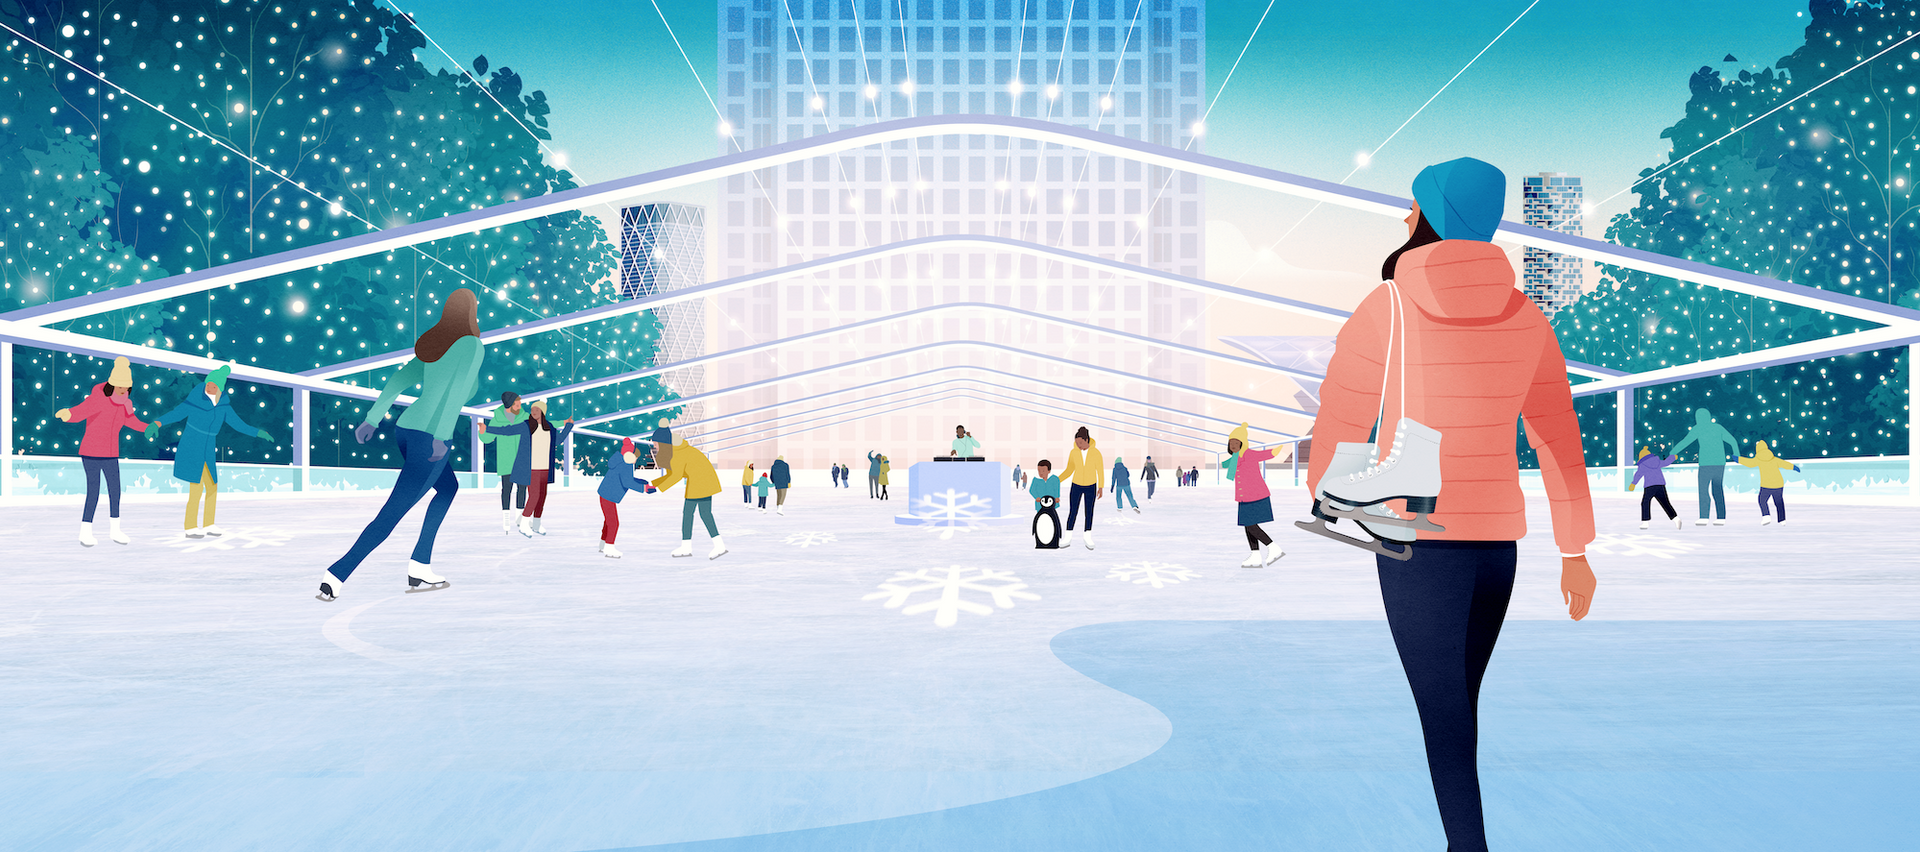 Wintry big city ice rink scene with people skating in the foreground, flanked by trees with twinking lights